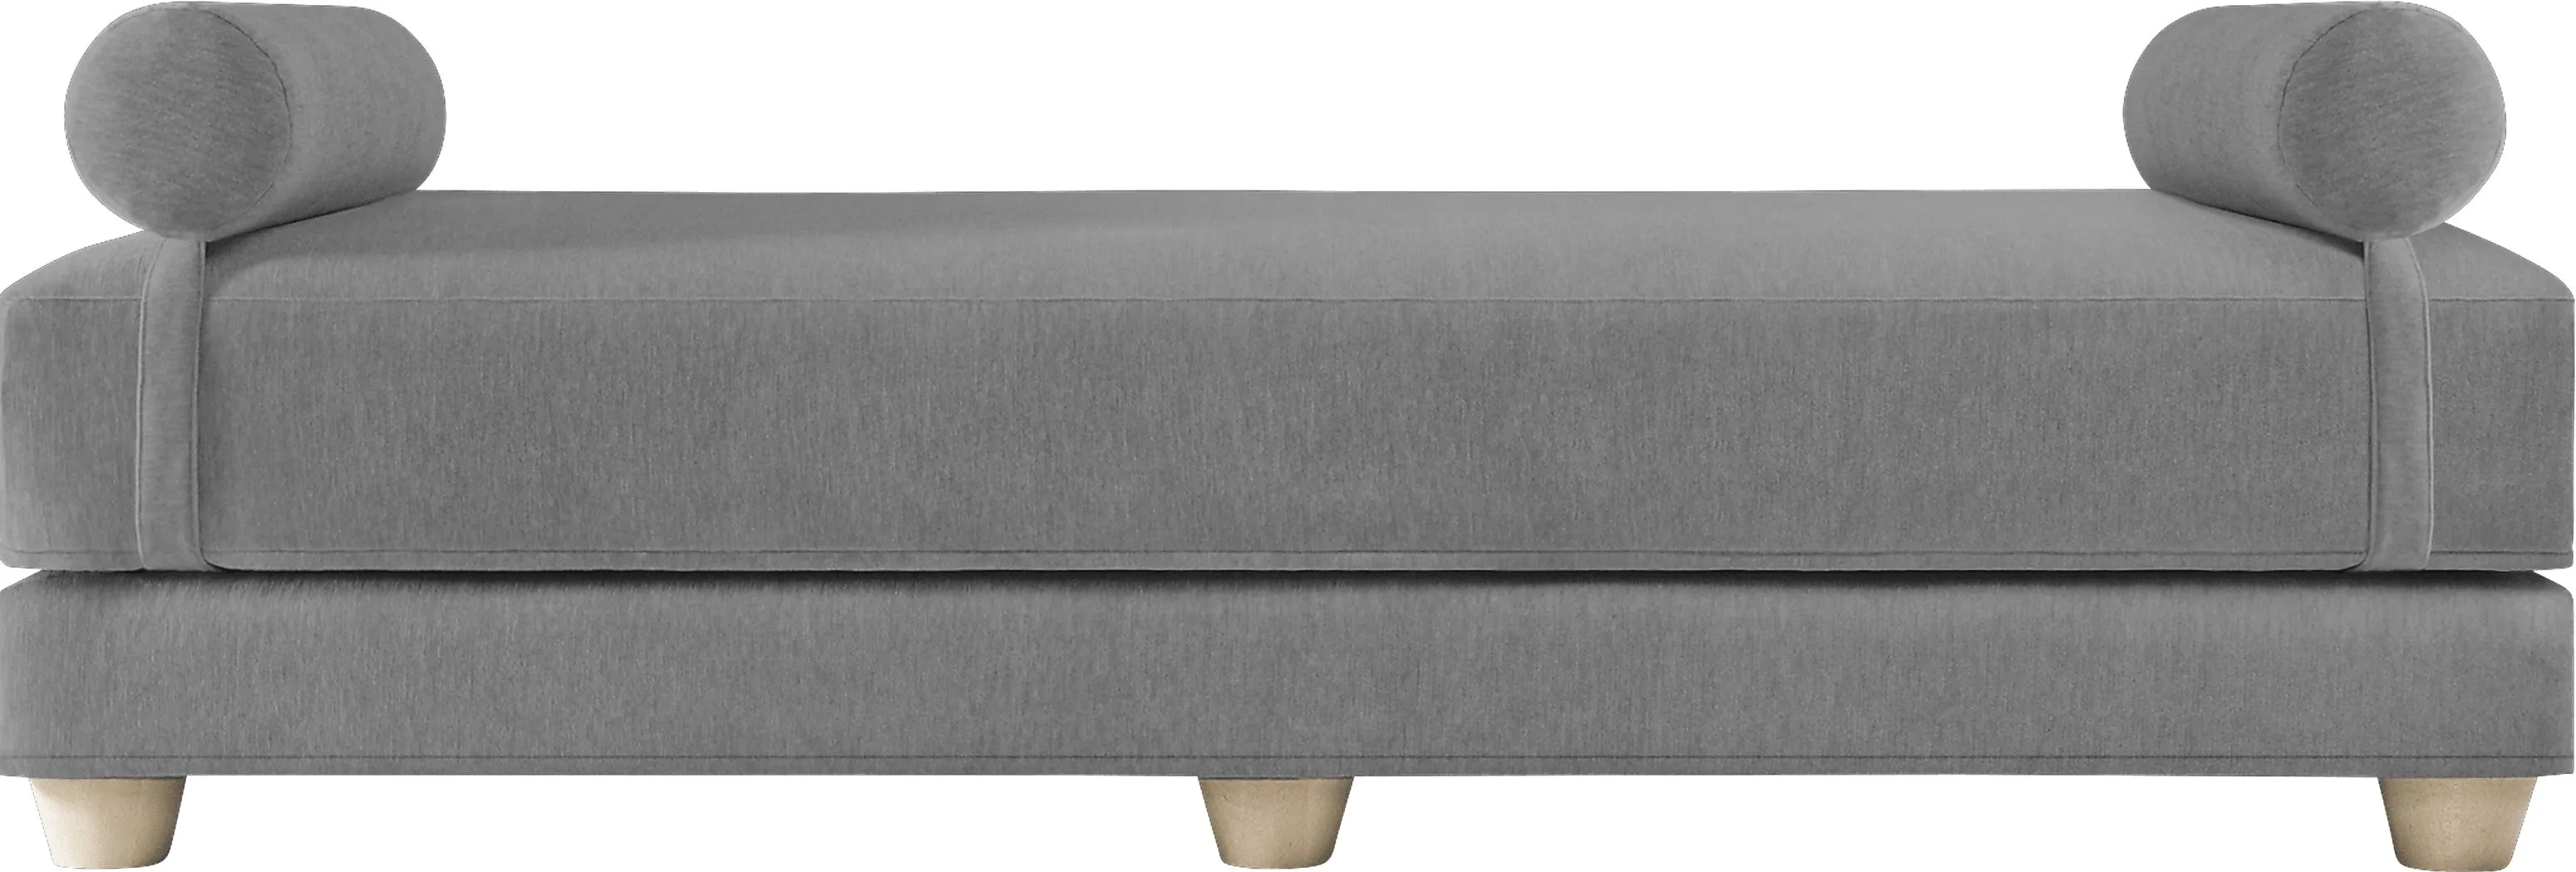 Adelaide Gray Daybed